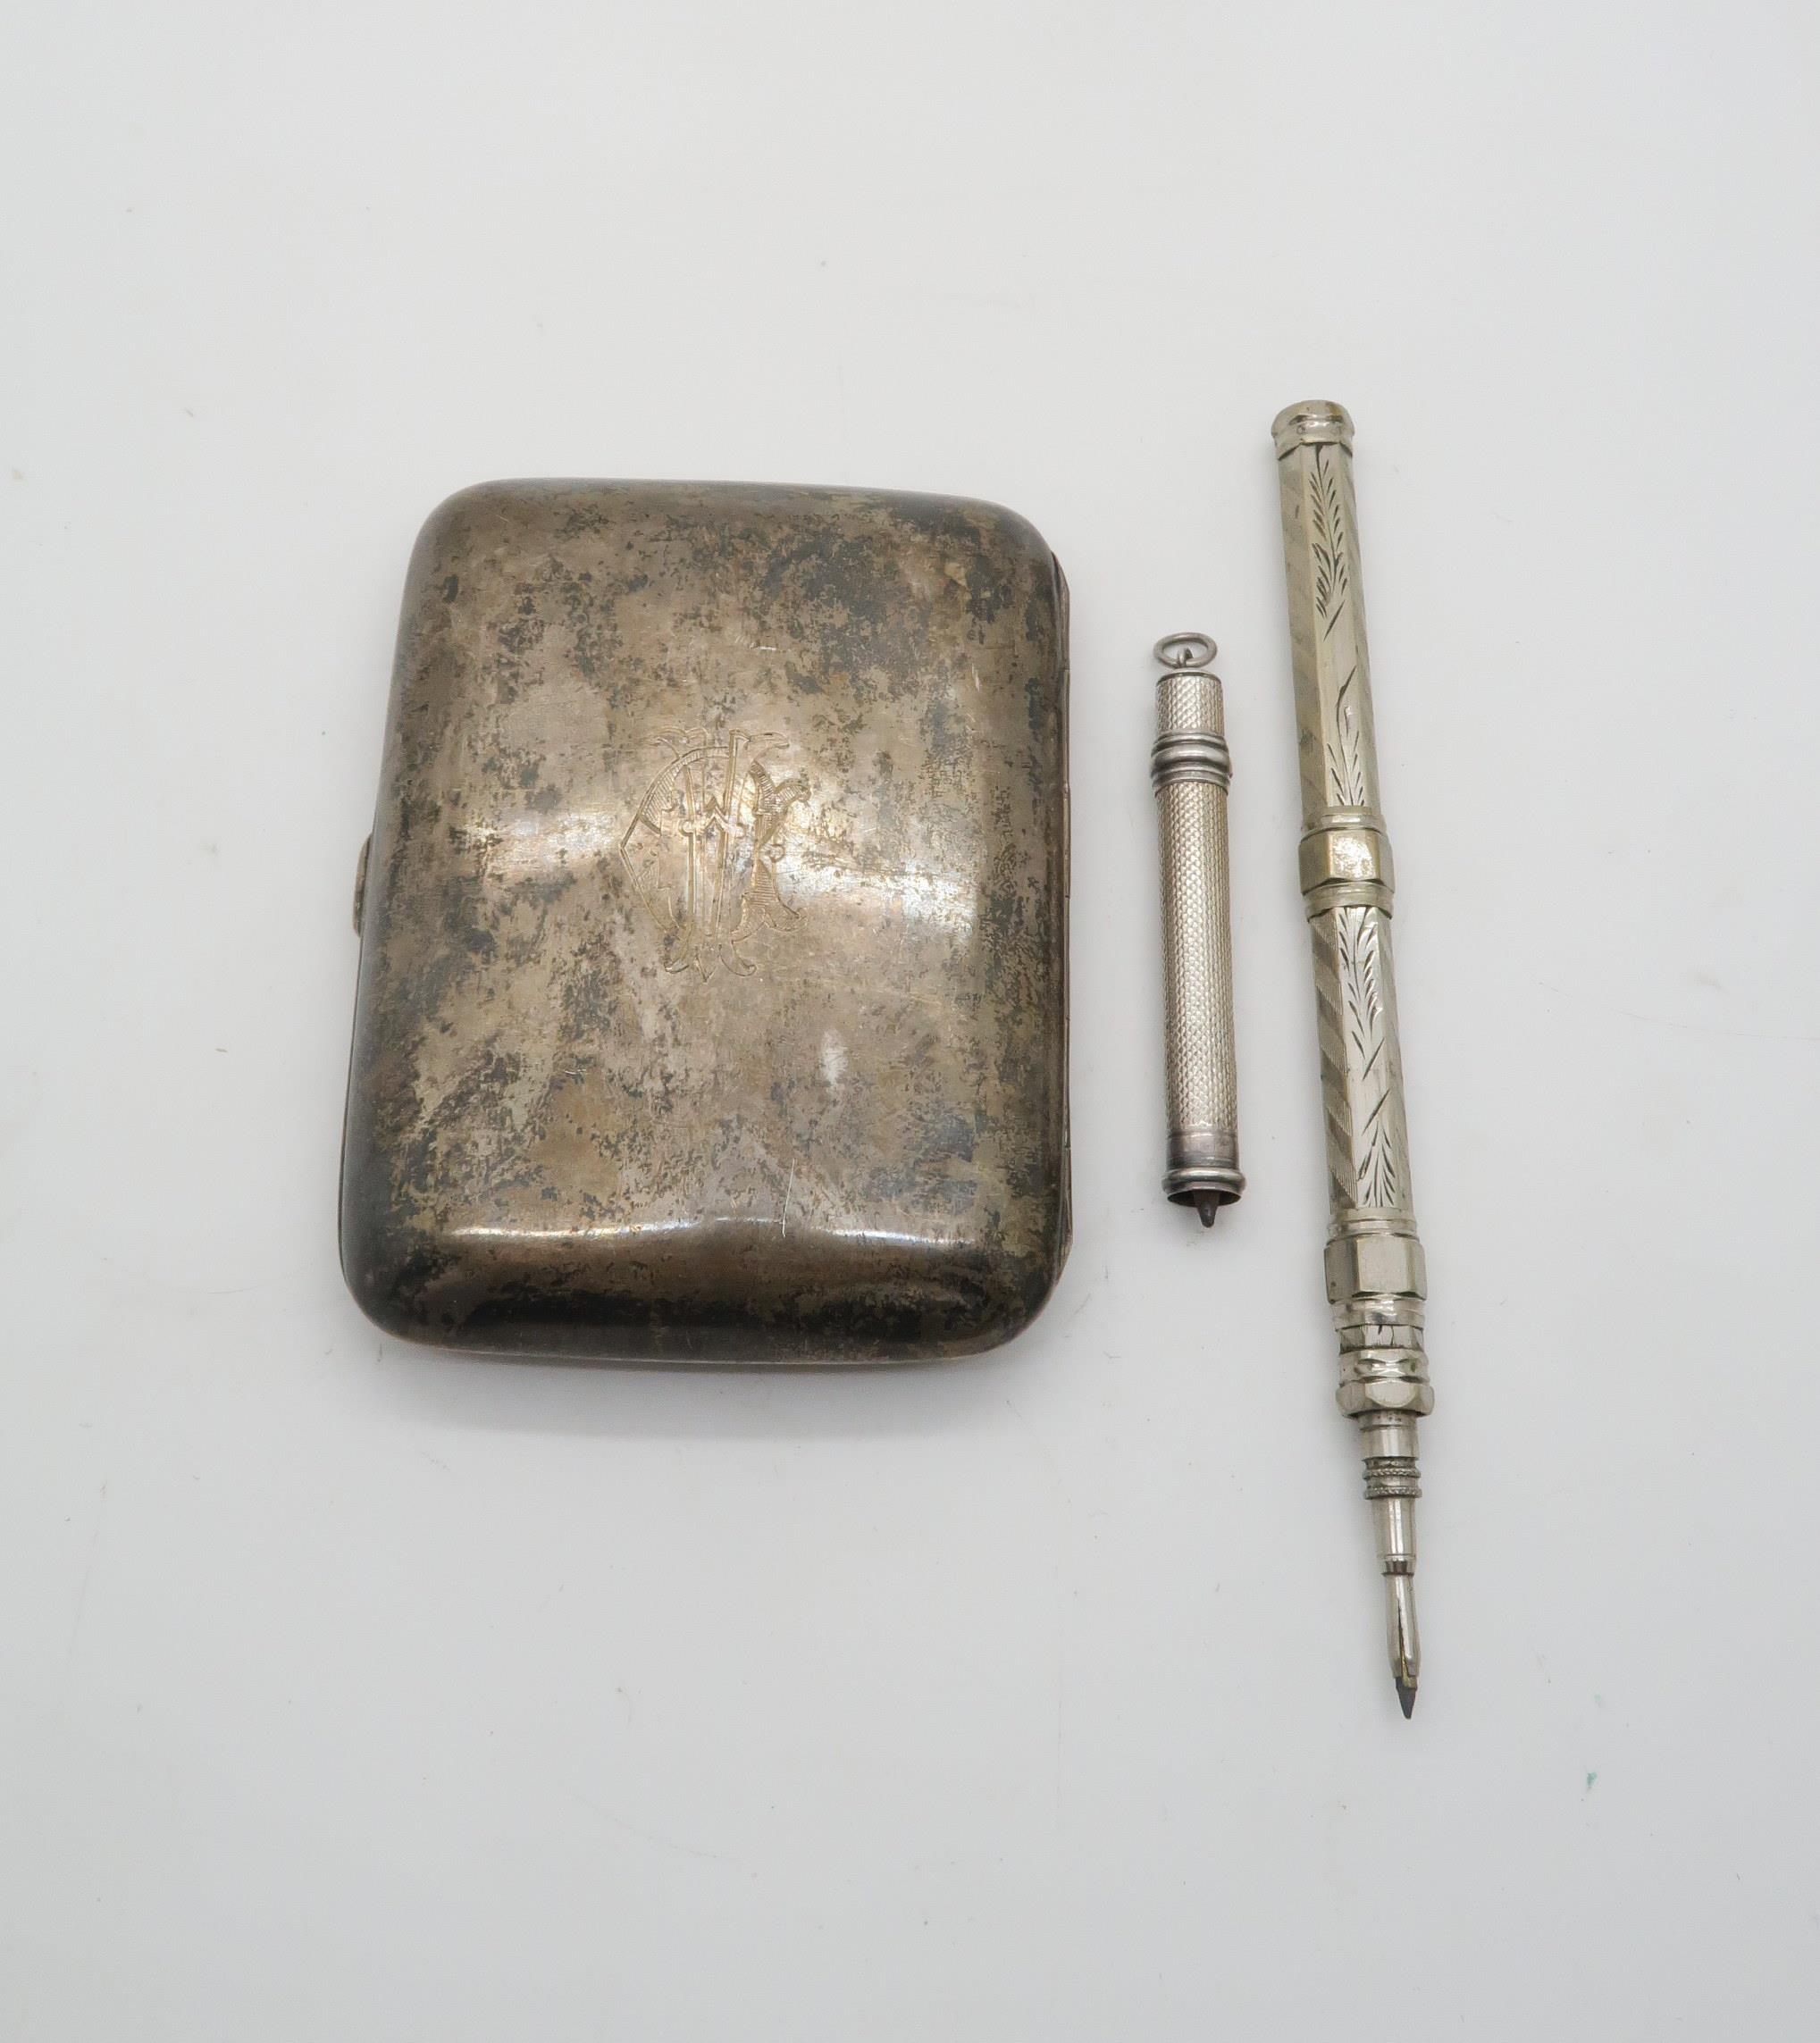 An Edwardian silver cigarette case, the front with engraved initials, by William Henry Sparrow,